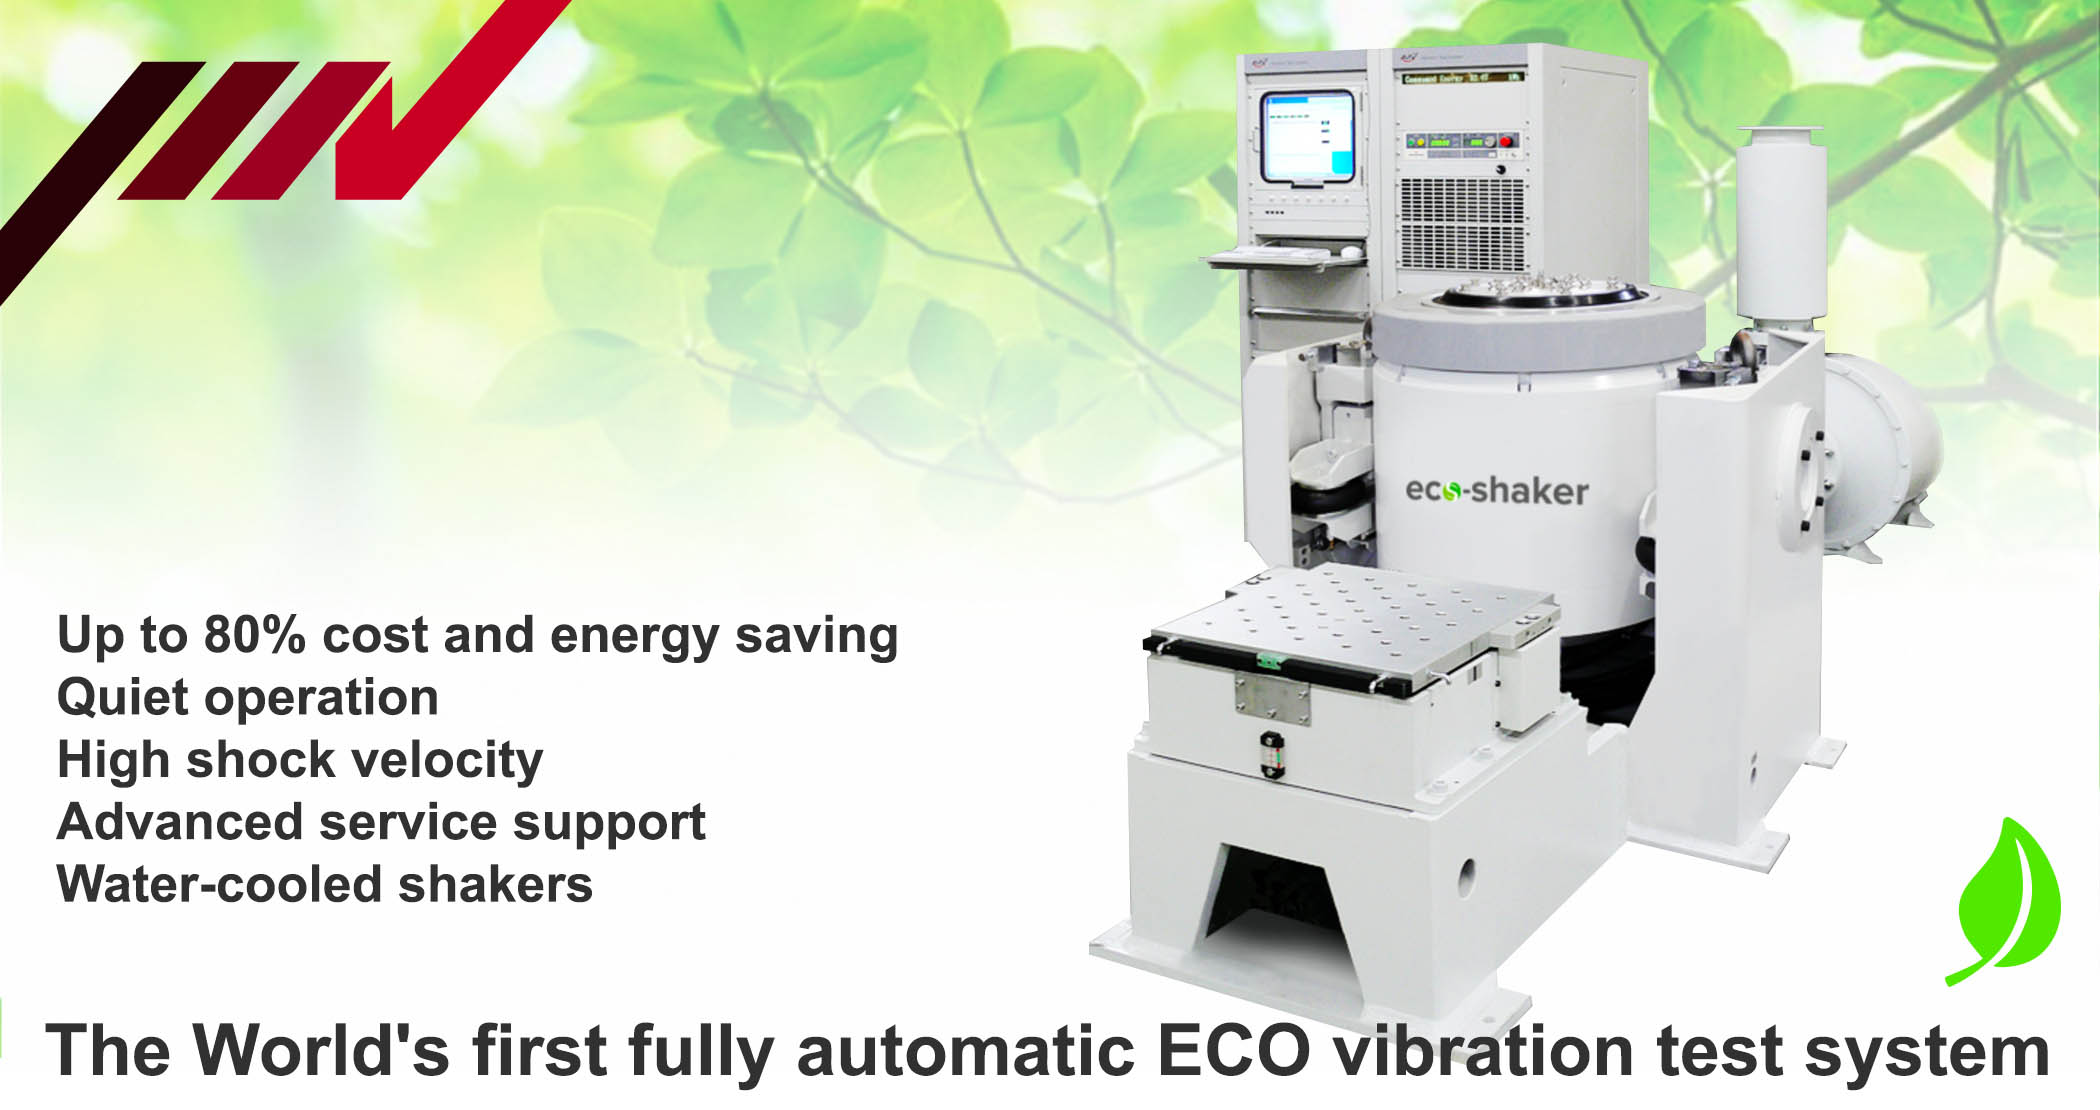 The Worlds first fully automatic ECO vibration test system